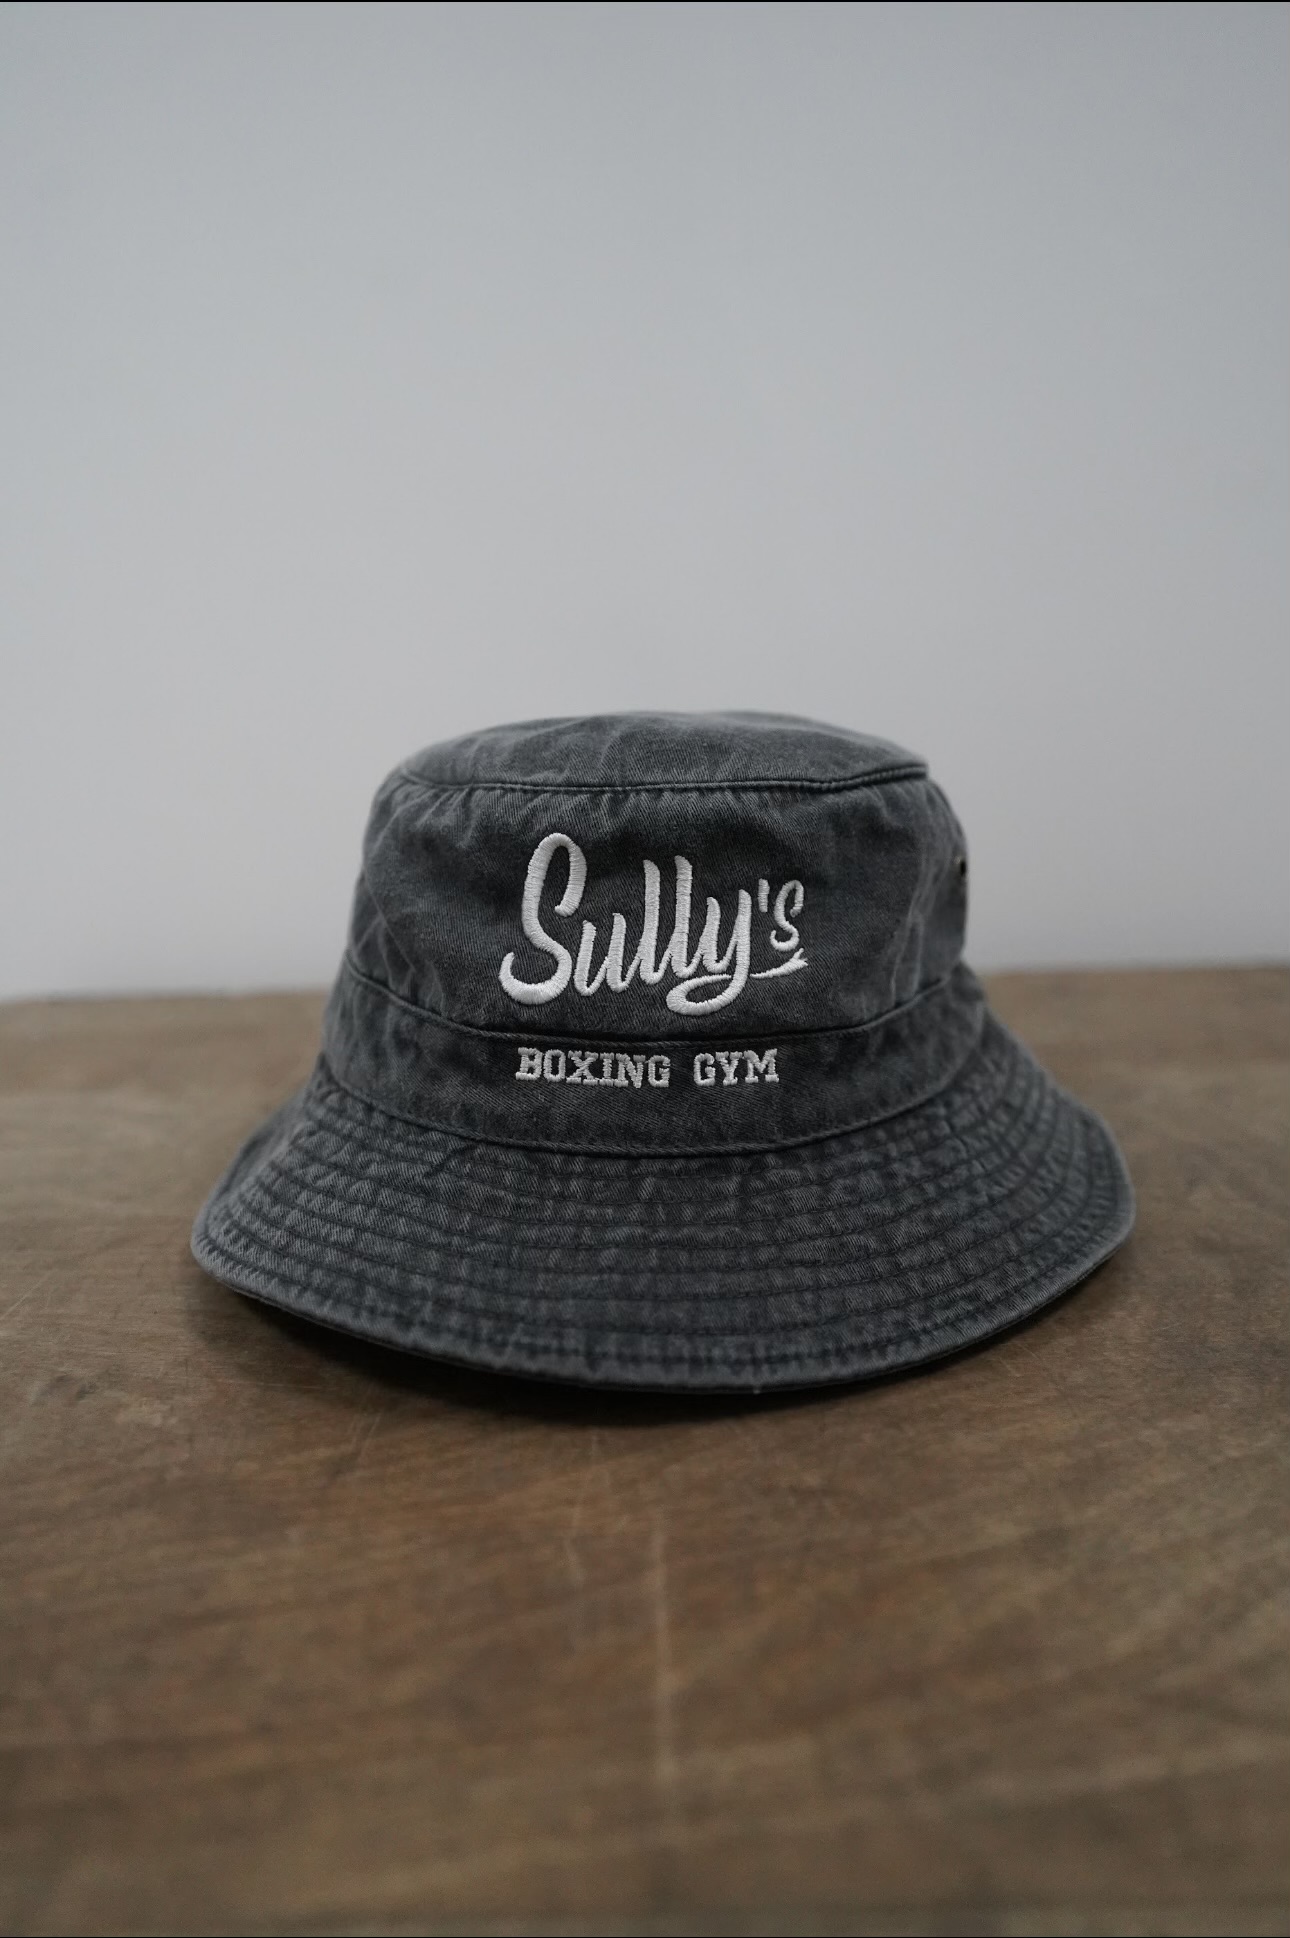 Distressed Bucket Hat with Sully's logo in gray.